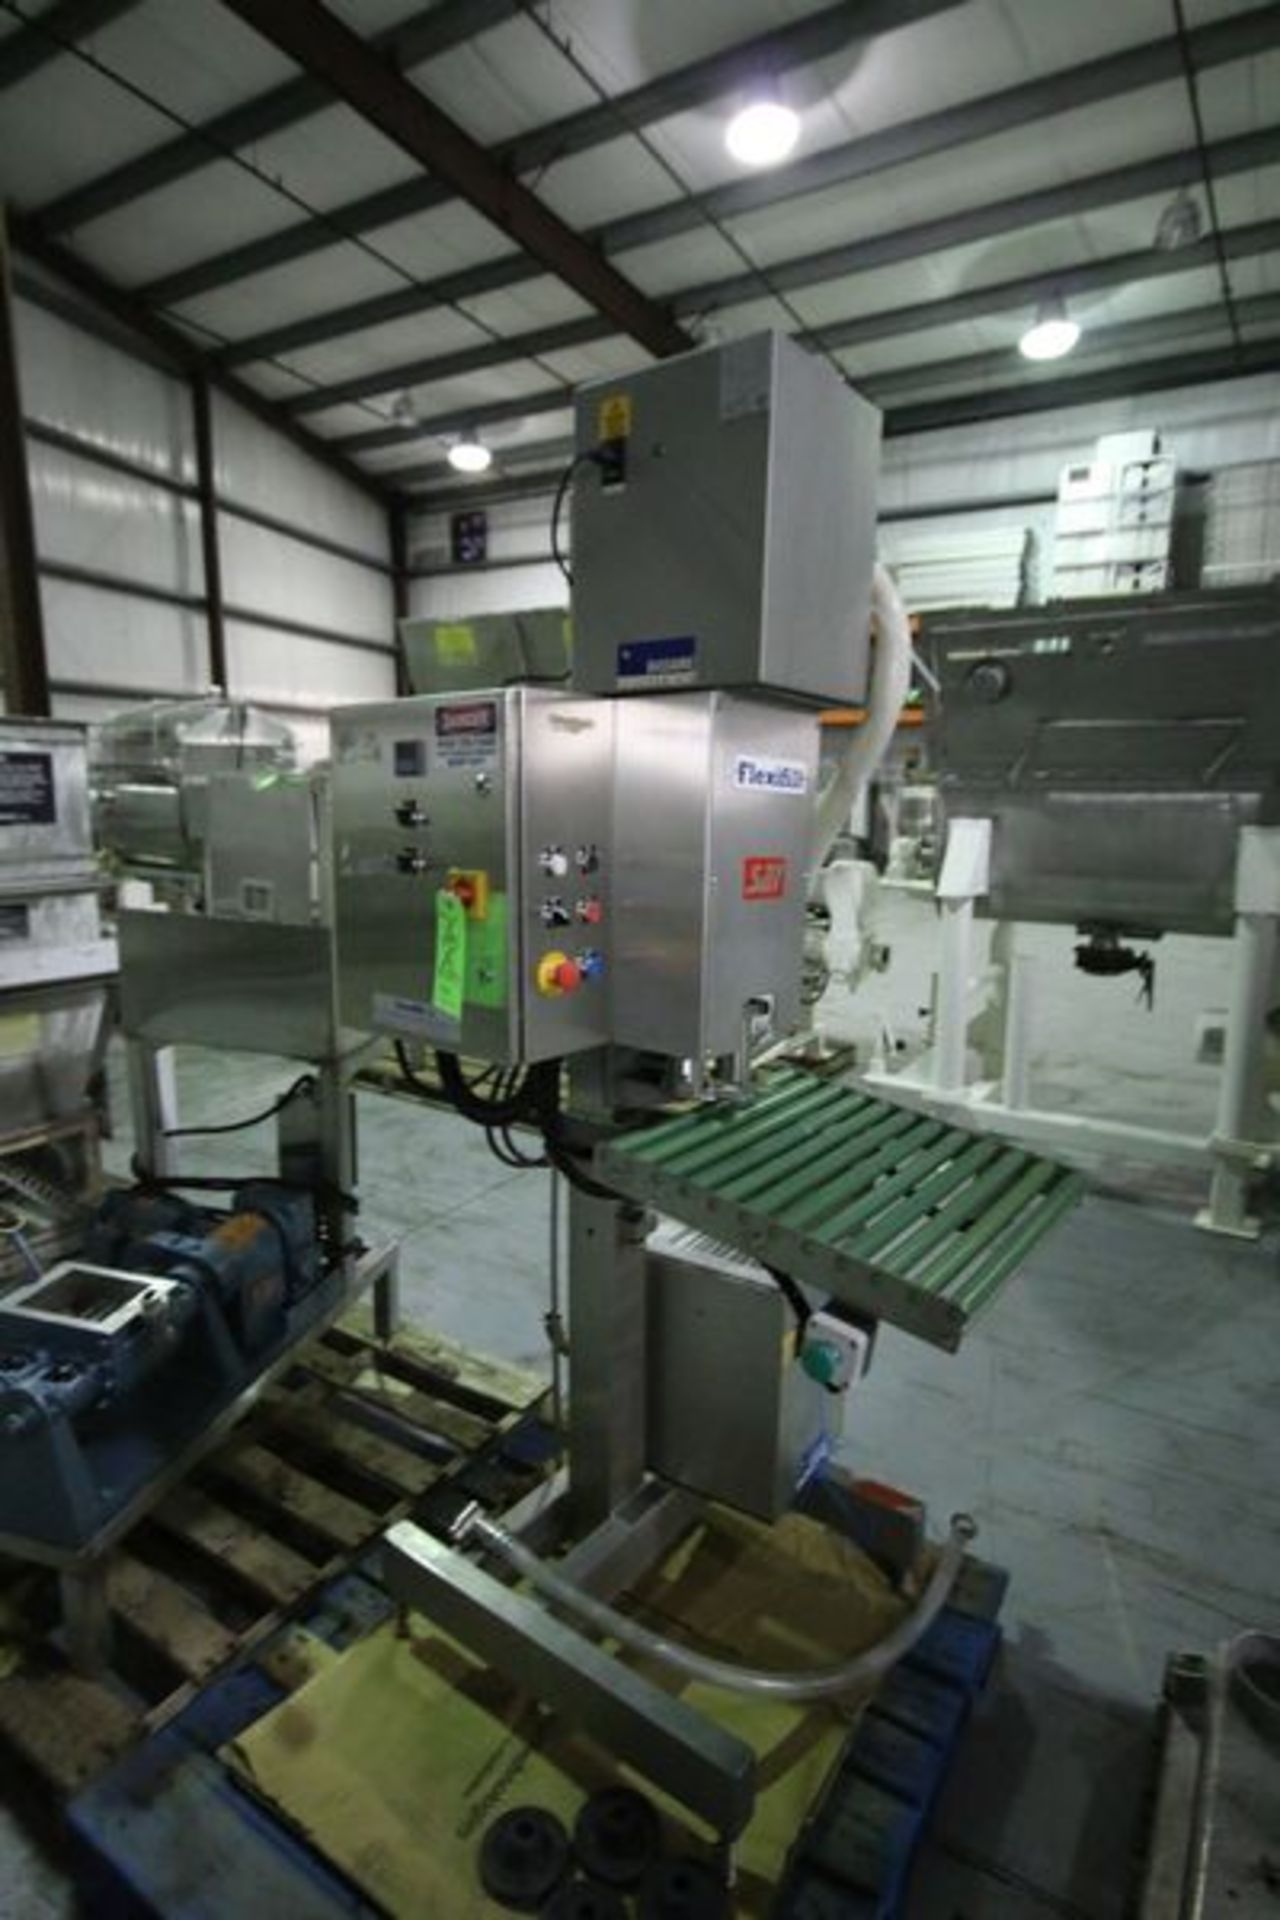 2006 SAI / Flexifill Bag-N-Box Filler & Capper, S/N FLX-025, Previously Utilized to Fill and Cap